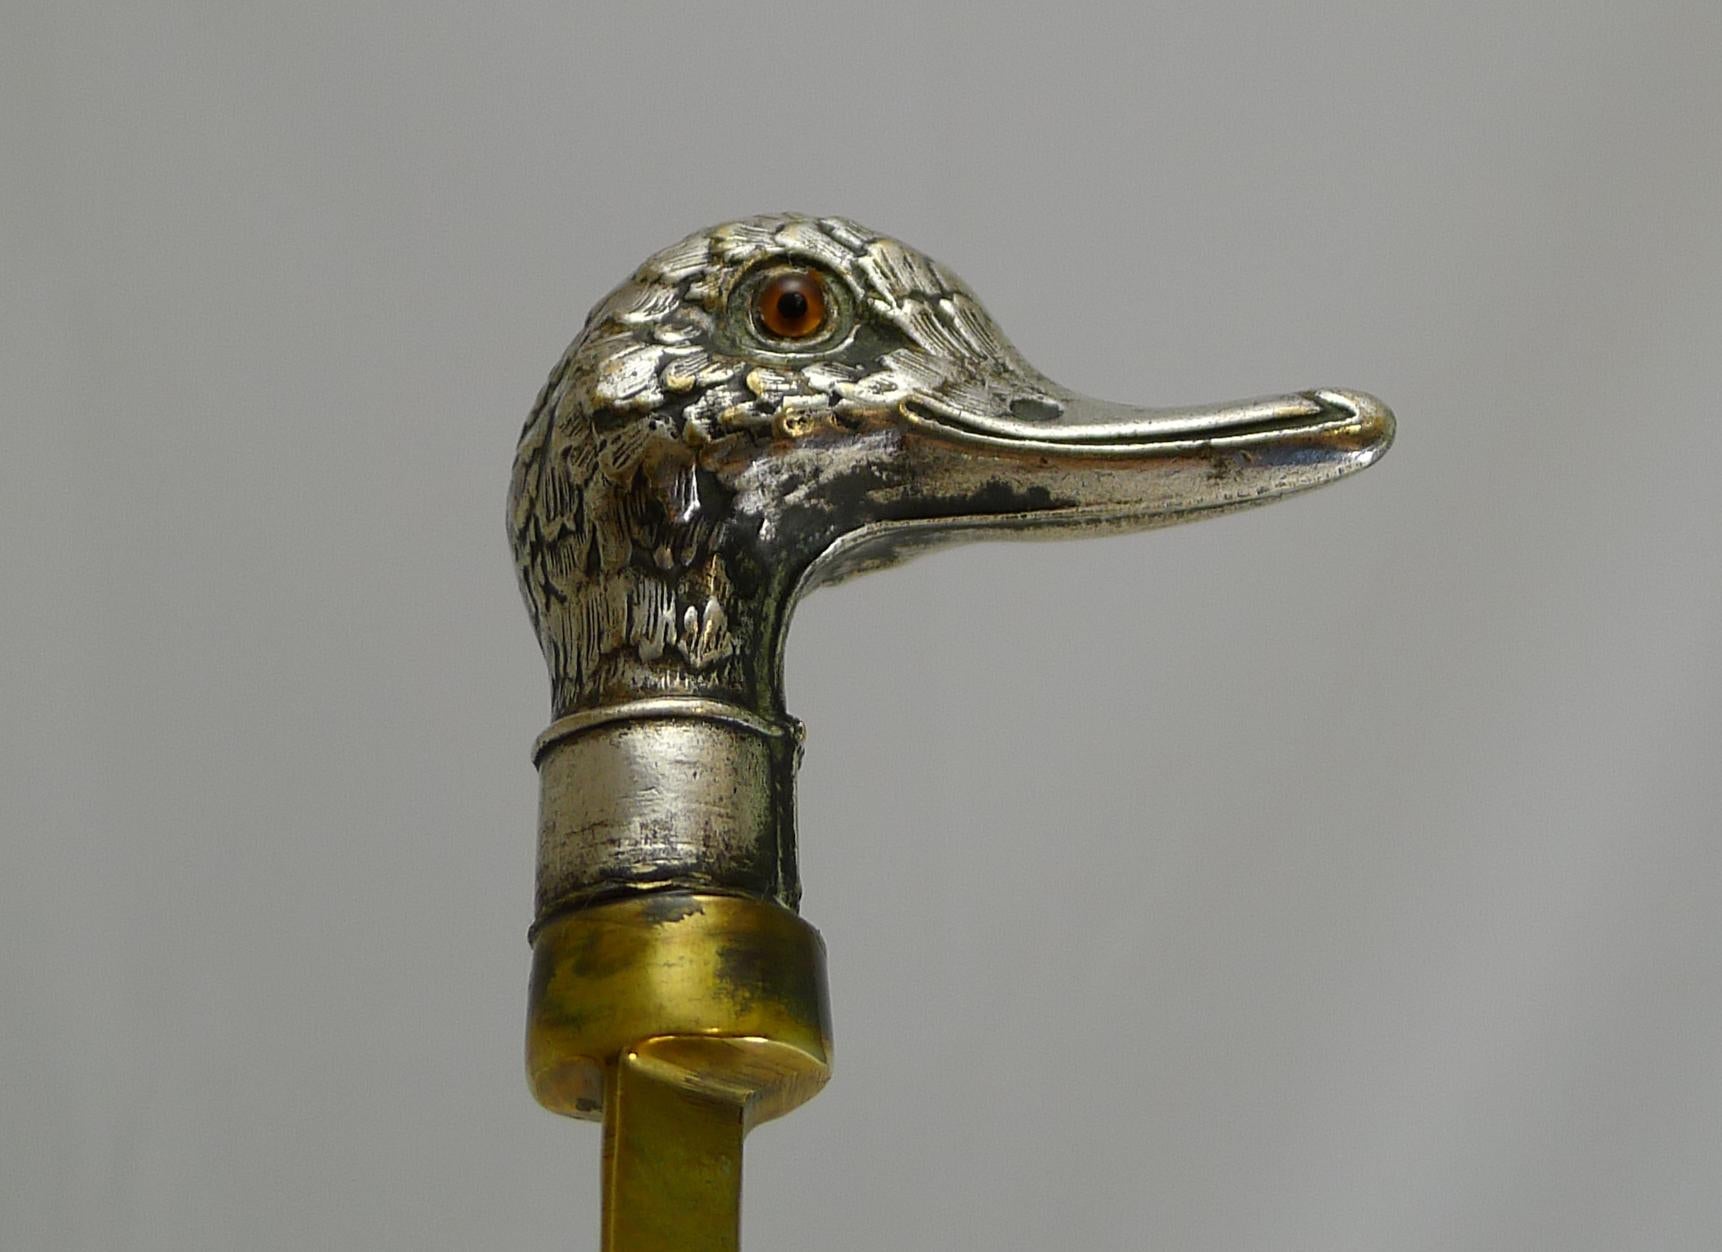 Late Victorian Antique English Novelty Letter Opener, Duck with Glass Eyes, circa 1900